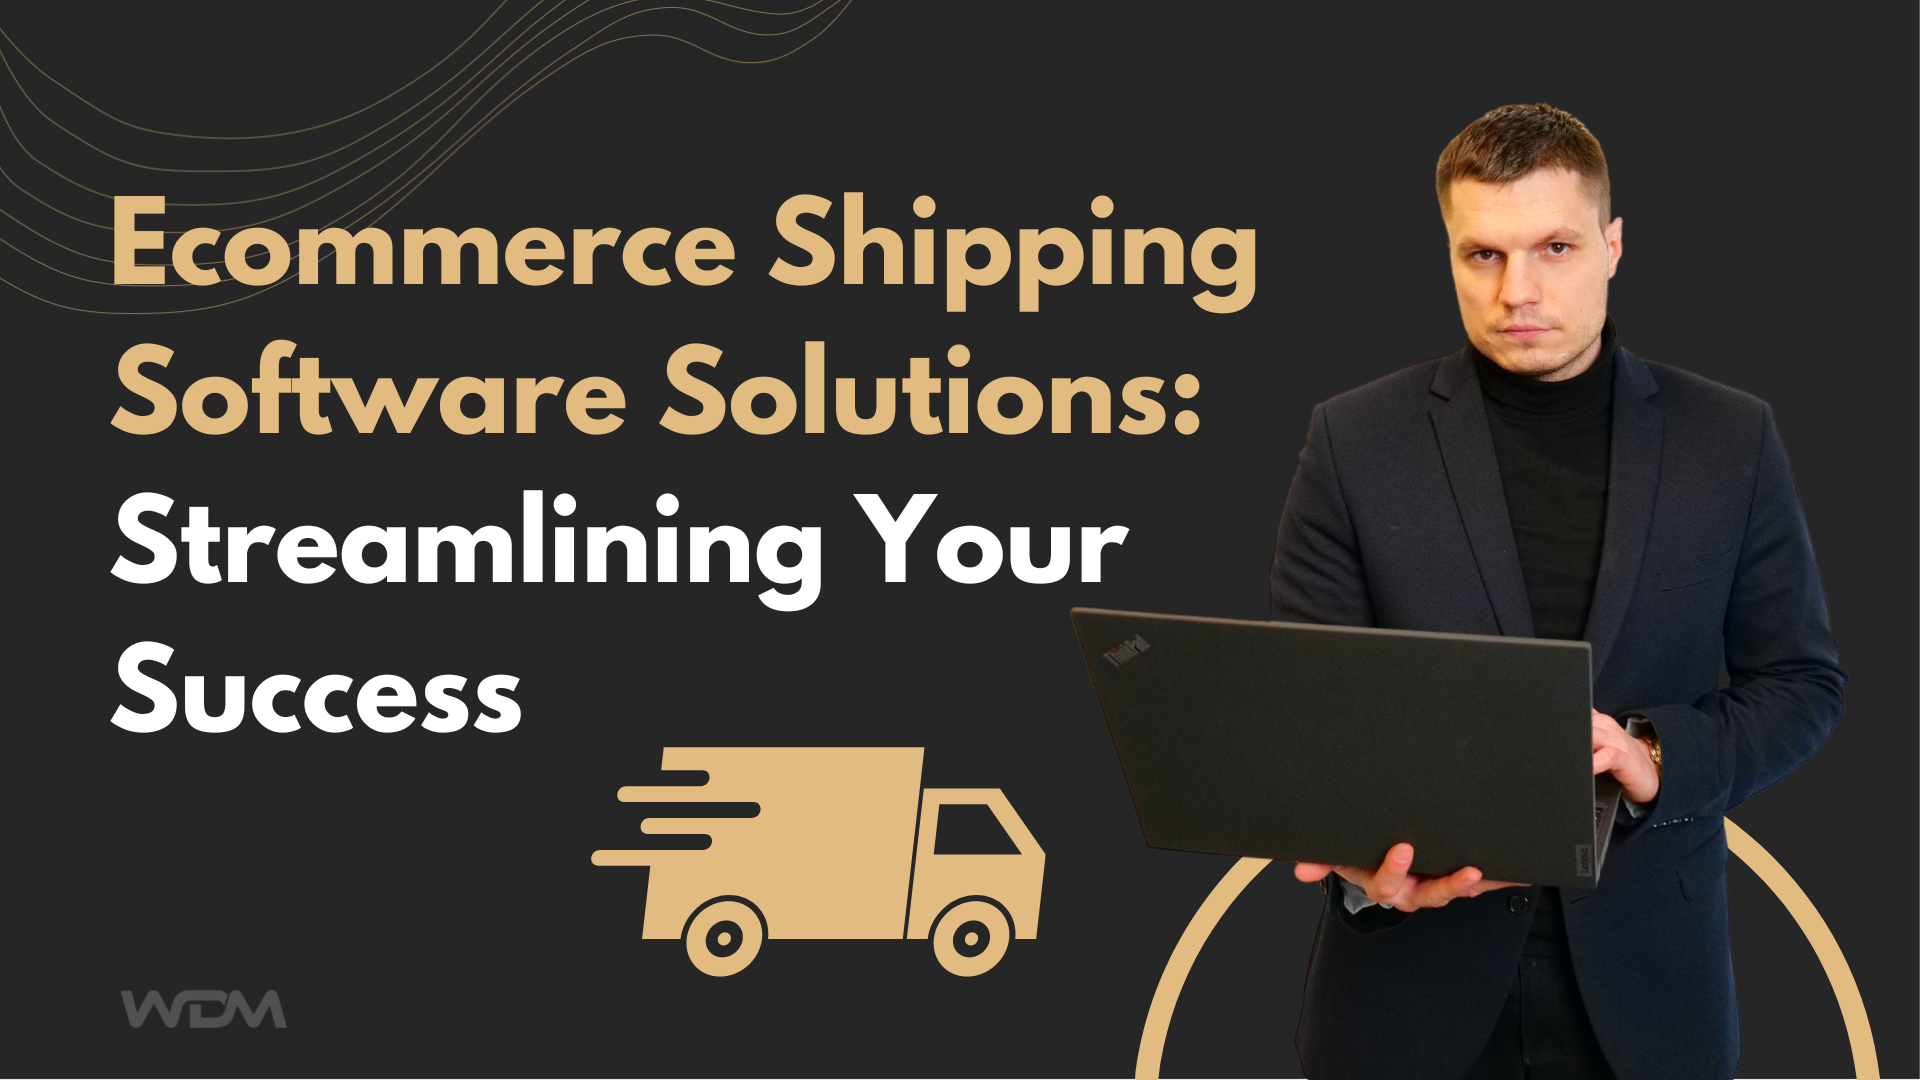 Ecommerce Shipping Software Solutions Streamlining Your Success